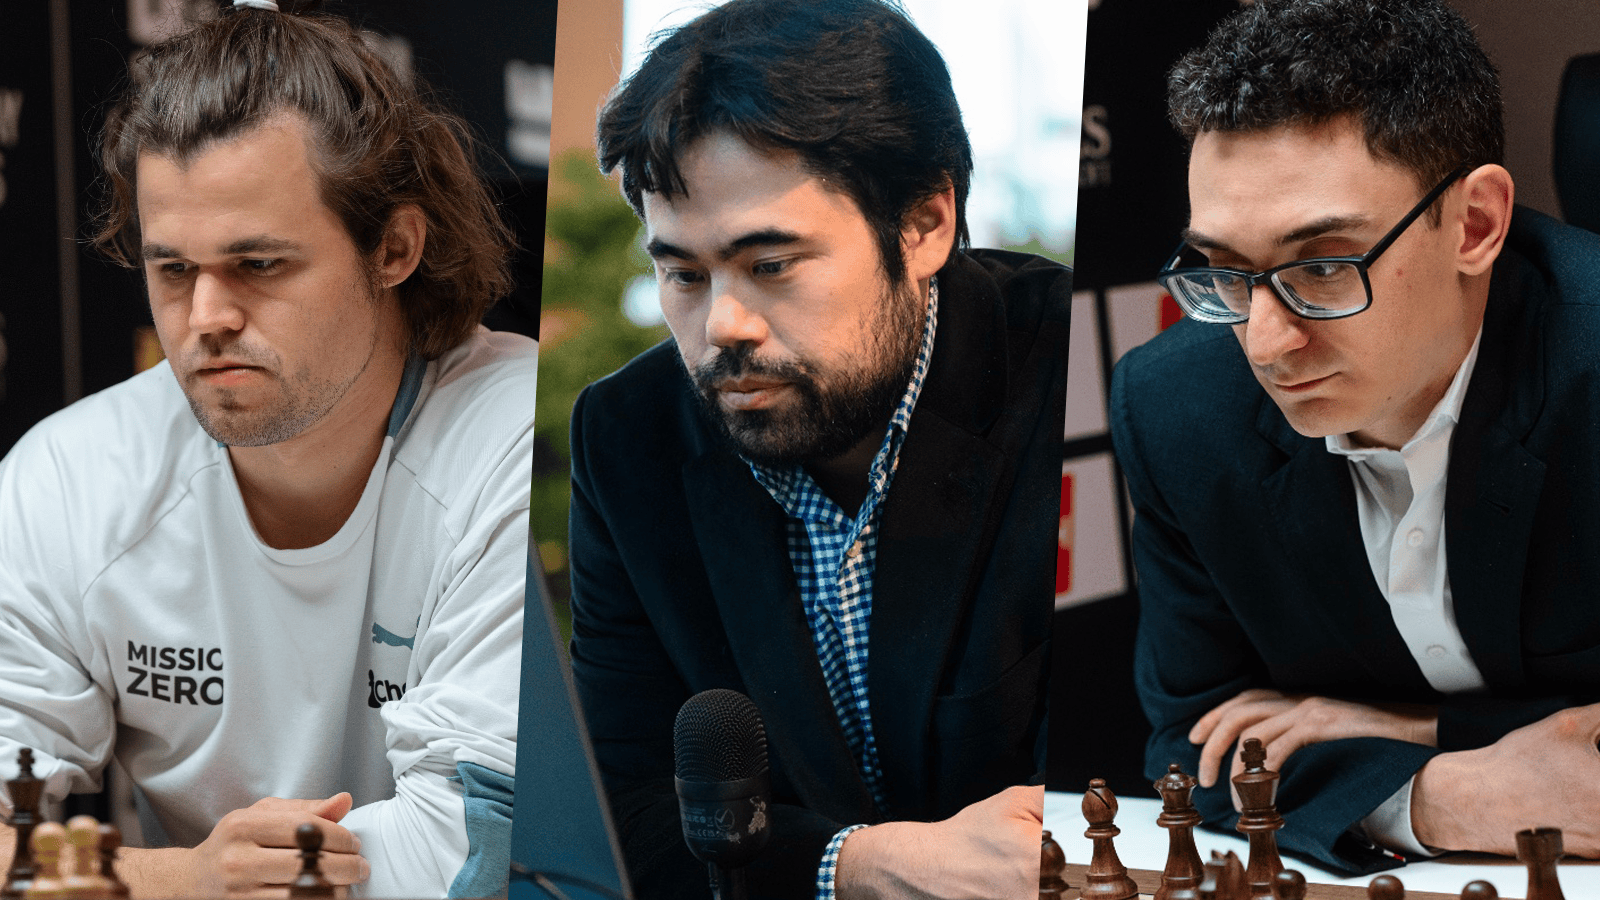 Do favorites win World Chess Championship qualifiers? - SparkChess